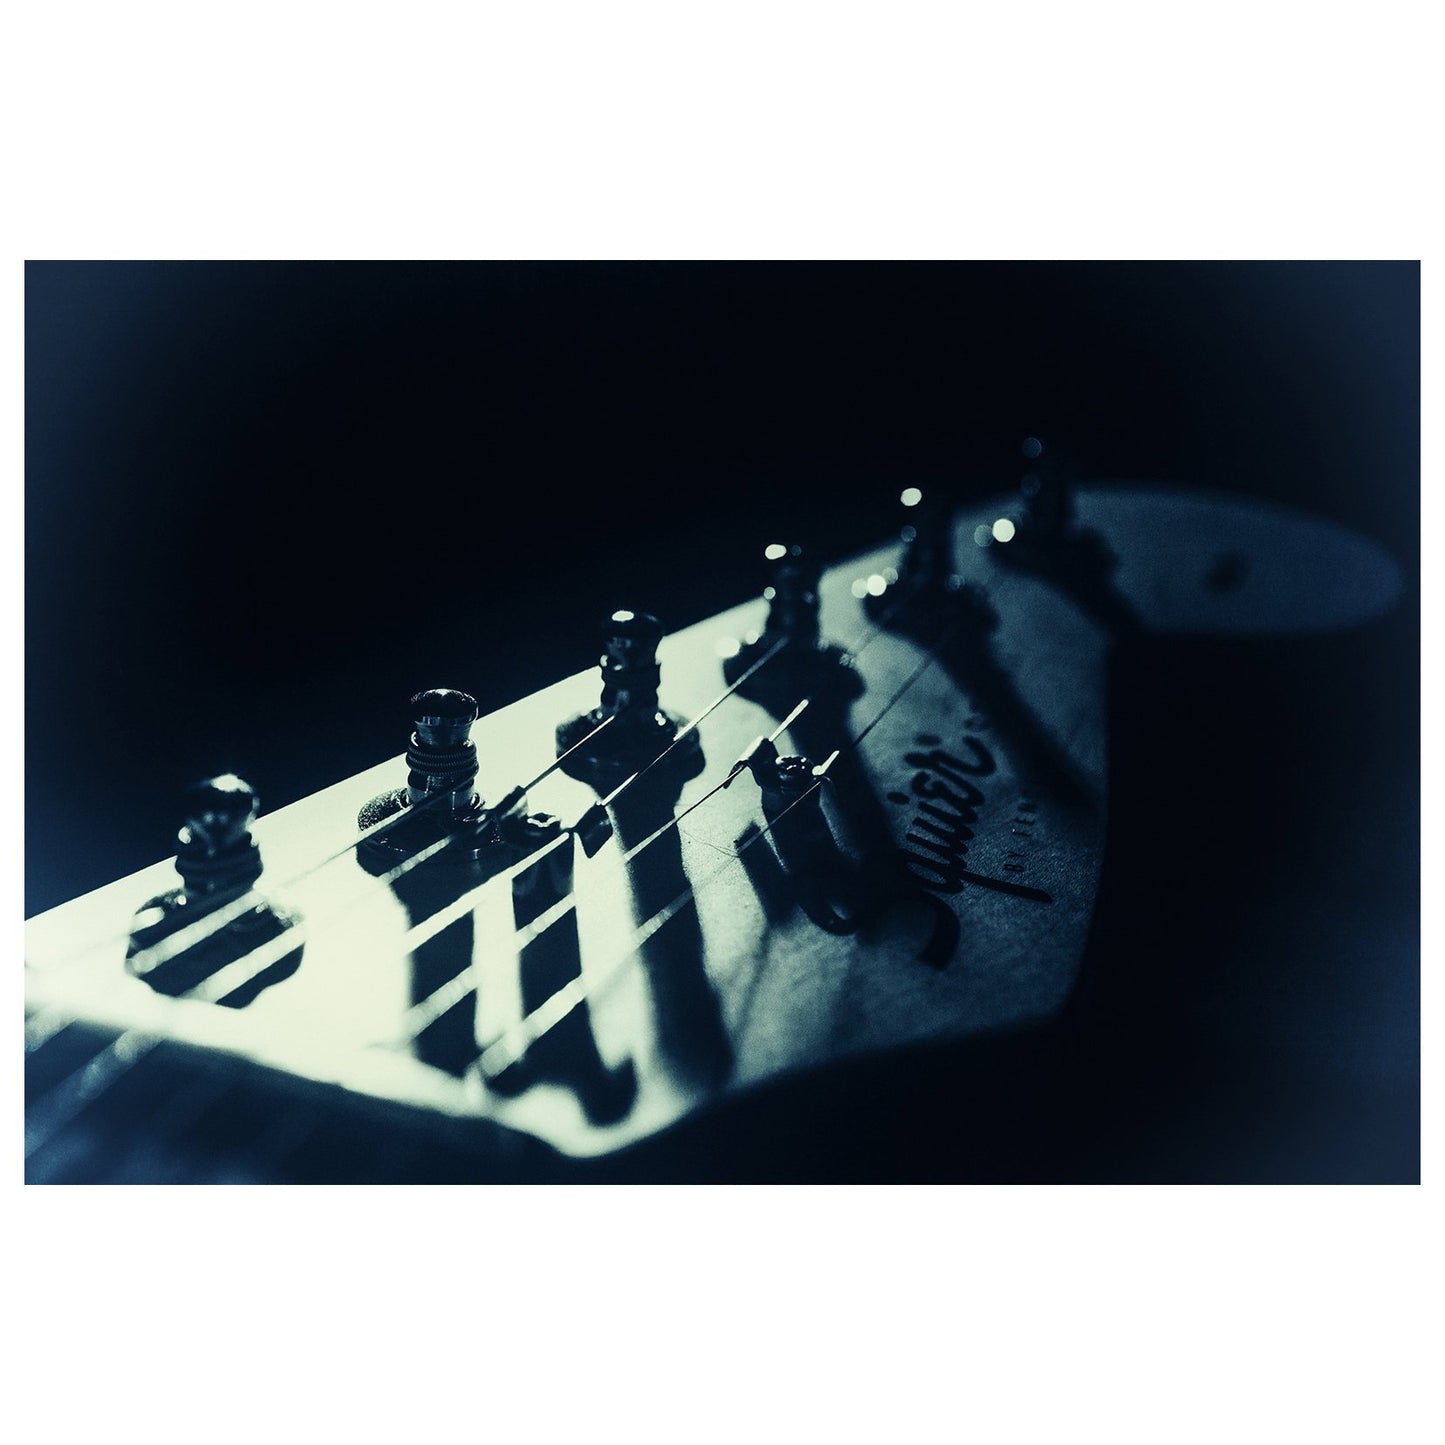 Squire Electric Guitar Head Colorized Black and White Abstract Photo Fine Art Canvas & Unframed Wall Art Prints  - PIPAFINEART